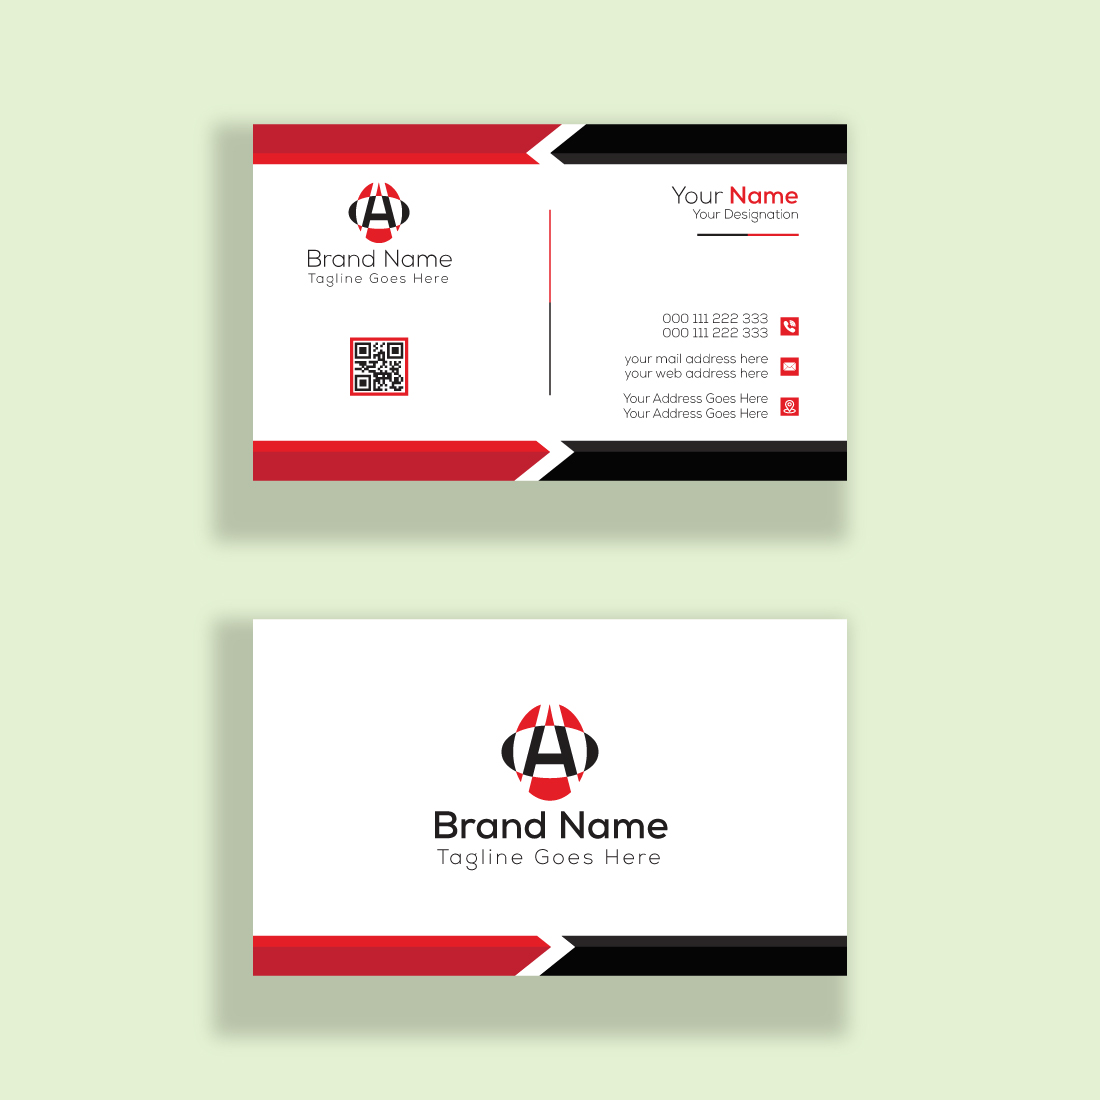 Corporate Business Card Template preview image.